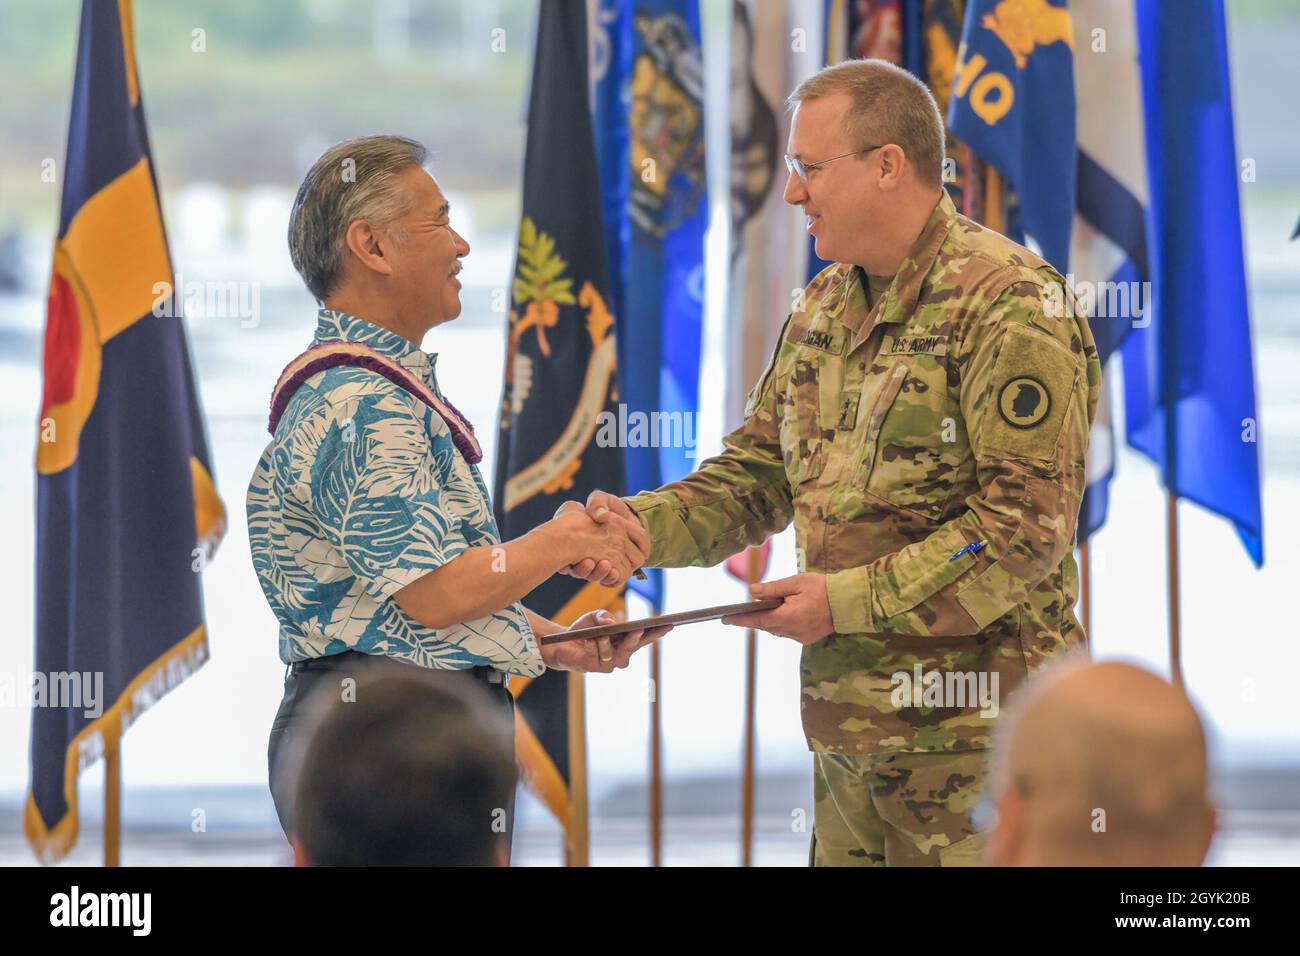 Hawaii State Governor, David Y. Ige, hands Maj. Gen. Arthur J. Logan, former Adjutant General of Hawaii a Certificate of Appreciation during his retirement ceremony at the 29th Infantry Brigade Combat Team Readiness Center, Kapolei, Hawaii, January 12, 2020. Stock Photo